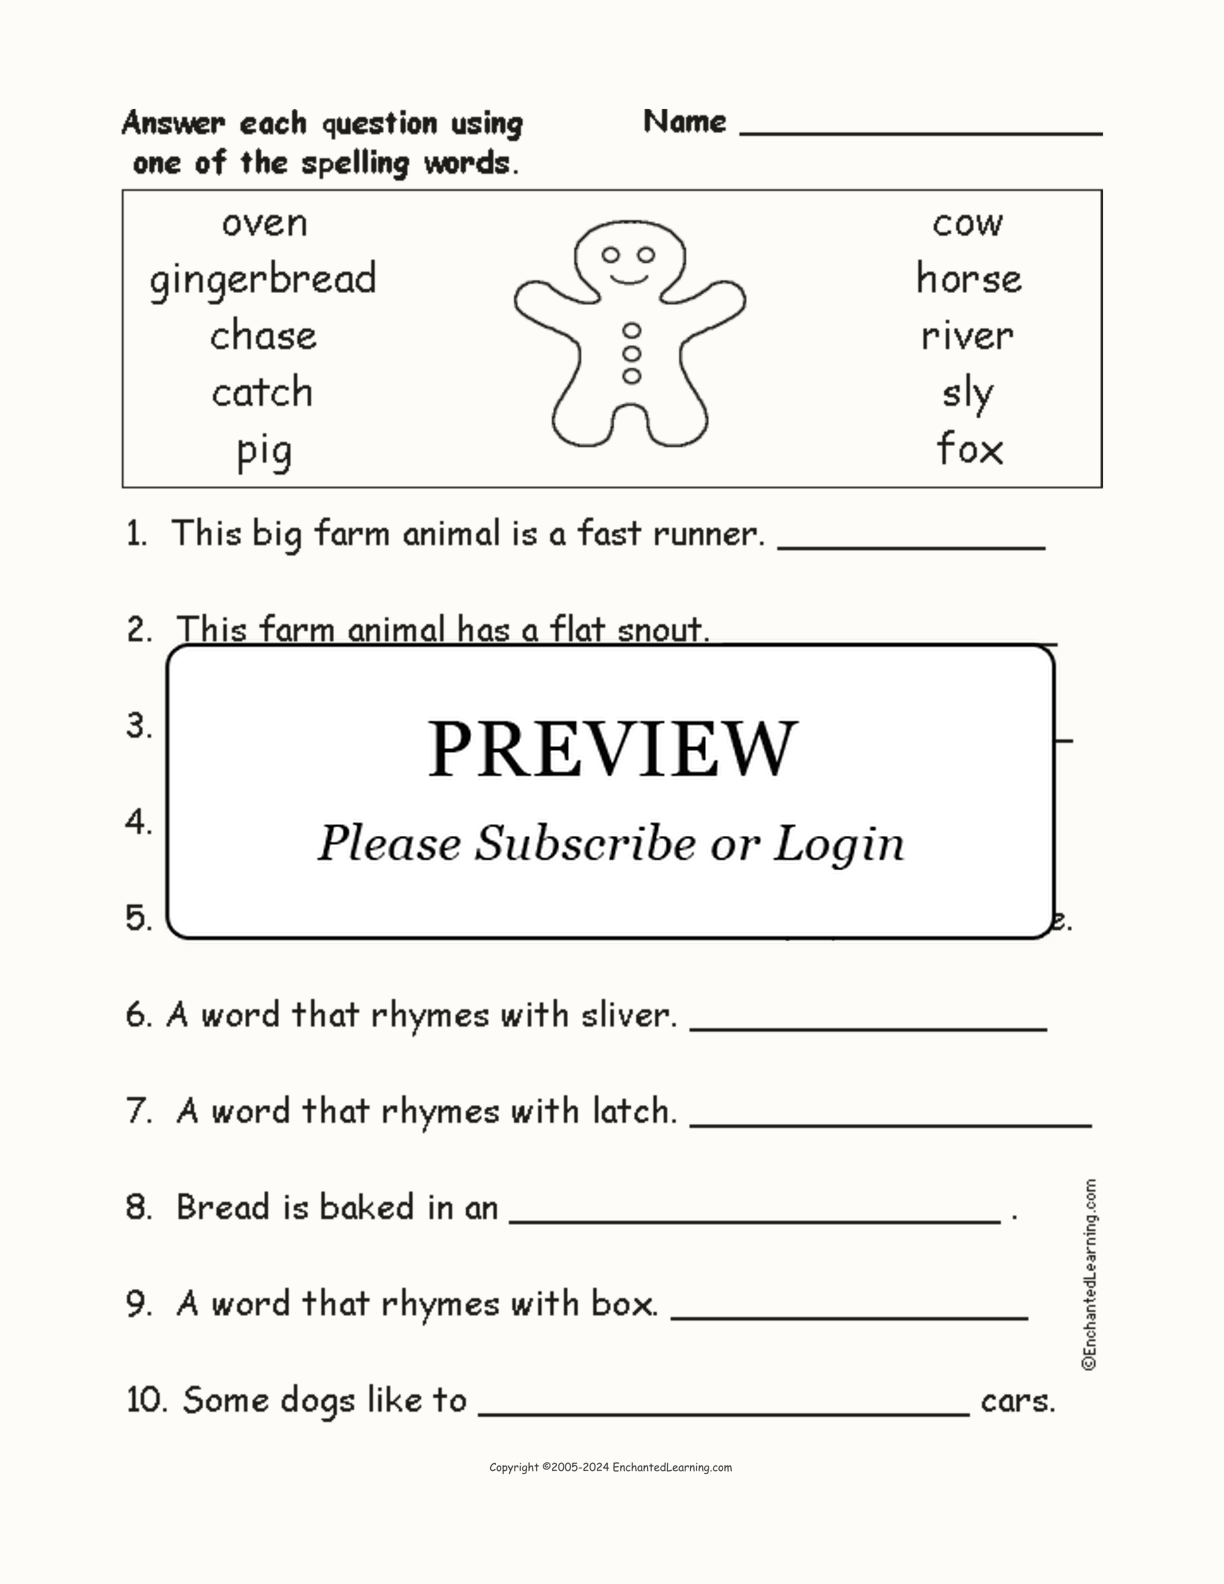 'The Gingerbread Man' Spelling Word Questions interactive worksheet page 1